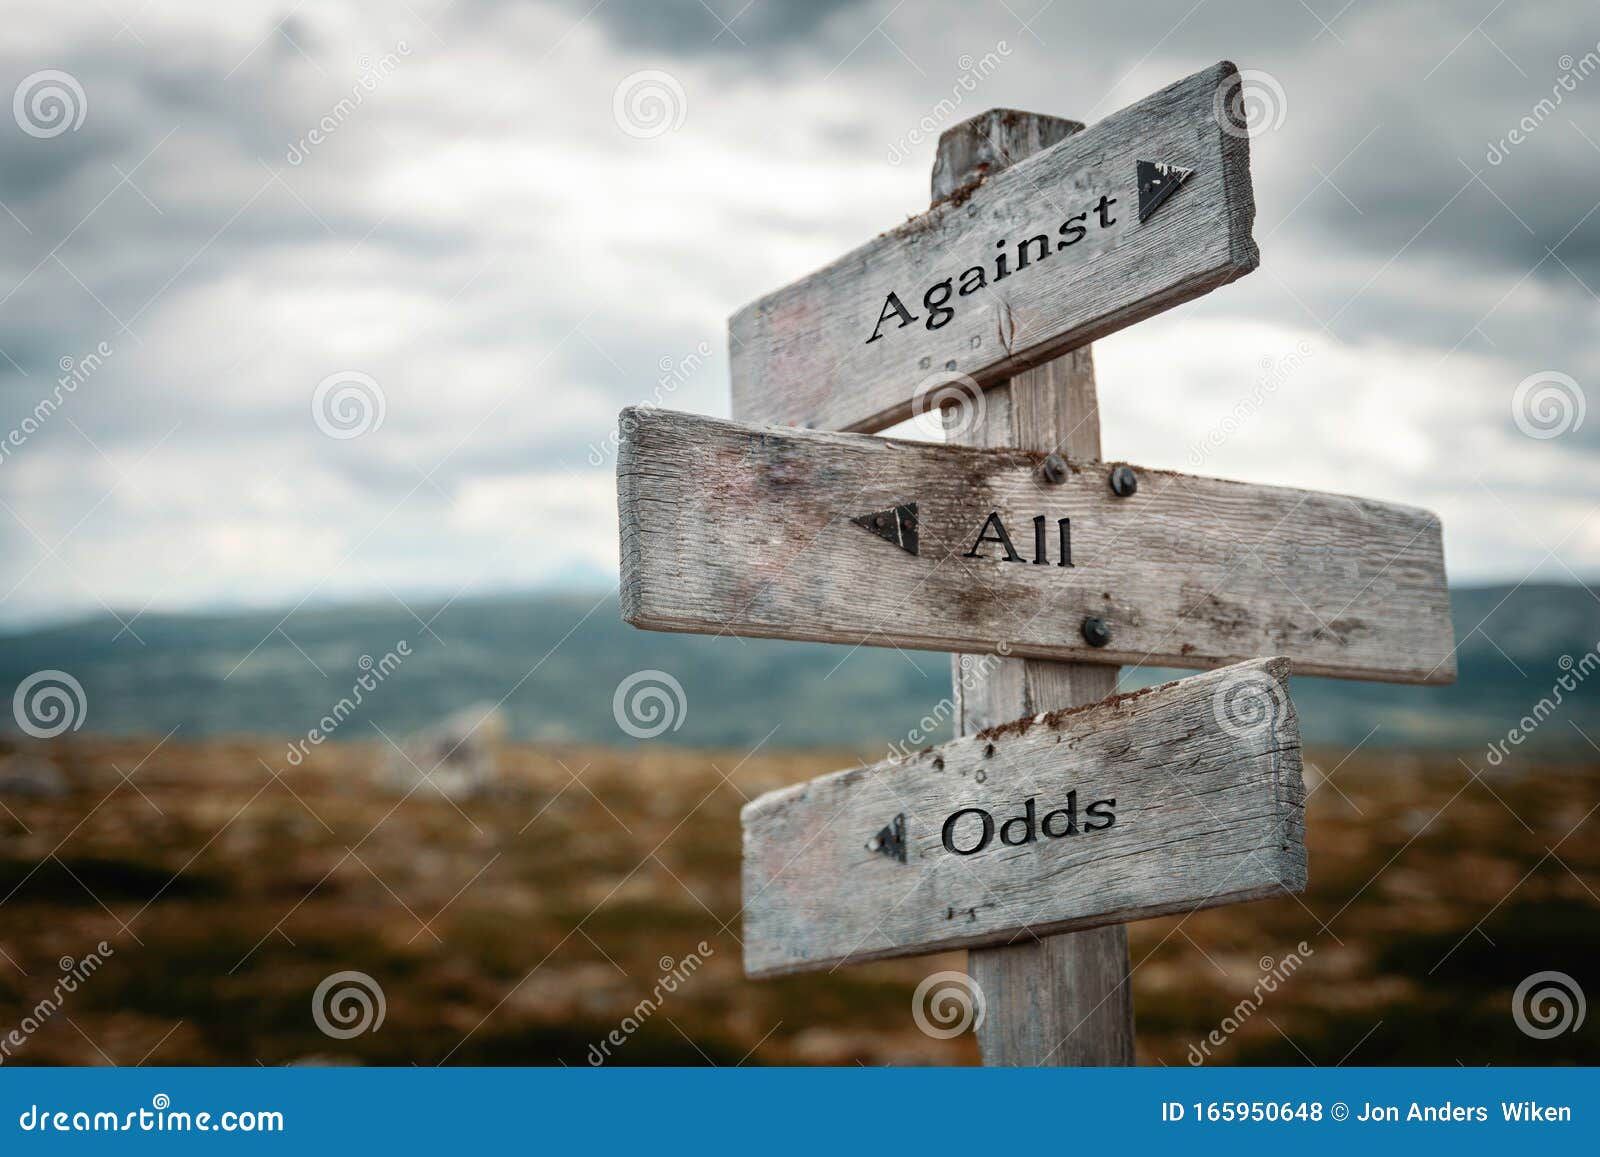 against all odds text on wooden rustic signpost outdoors in nature/mountain scenery.